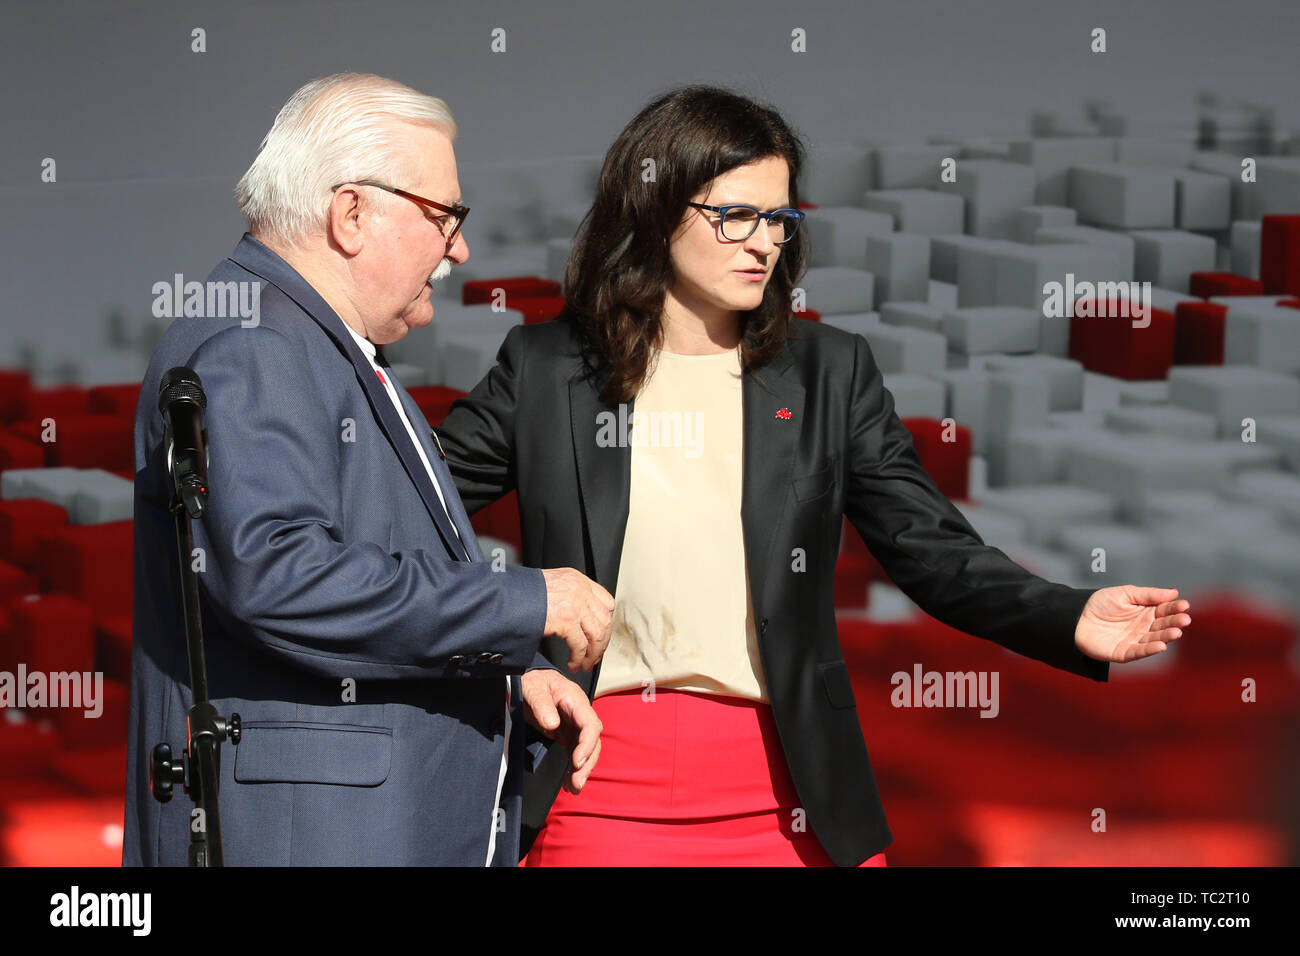 Gdansk, Poland. 4th June, 2019 Lech Walesa and Aleksandra Dulkiewicz during the rally on the Dlugi Targ street are seen Freedom and Solidarity Days mark 30th anniversary of the first partly free elections in Poland on 4th of June 1989.  © Vadim Pacajev / Alamy Live News Stock Photo